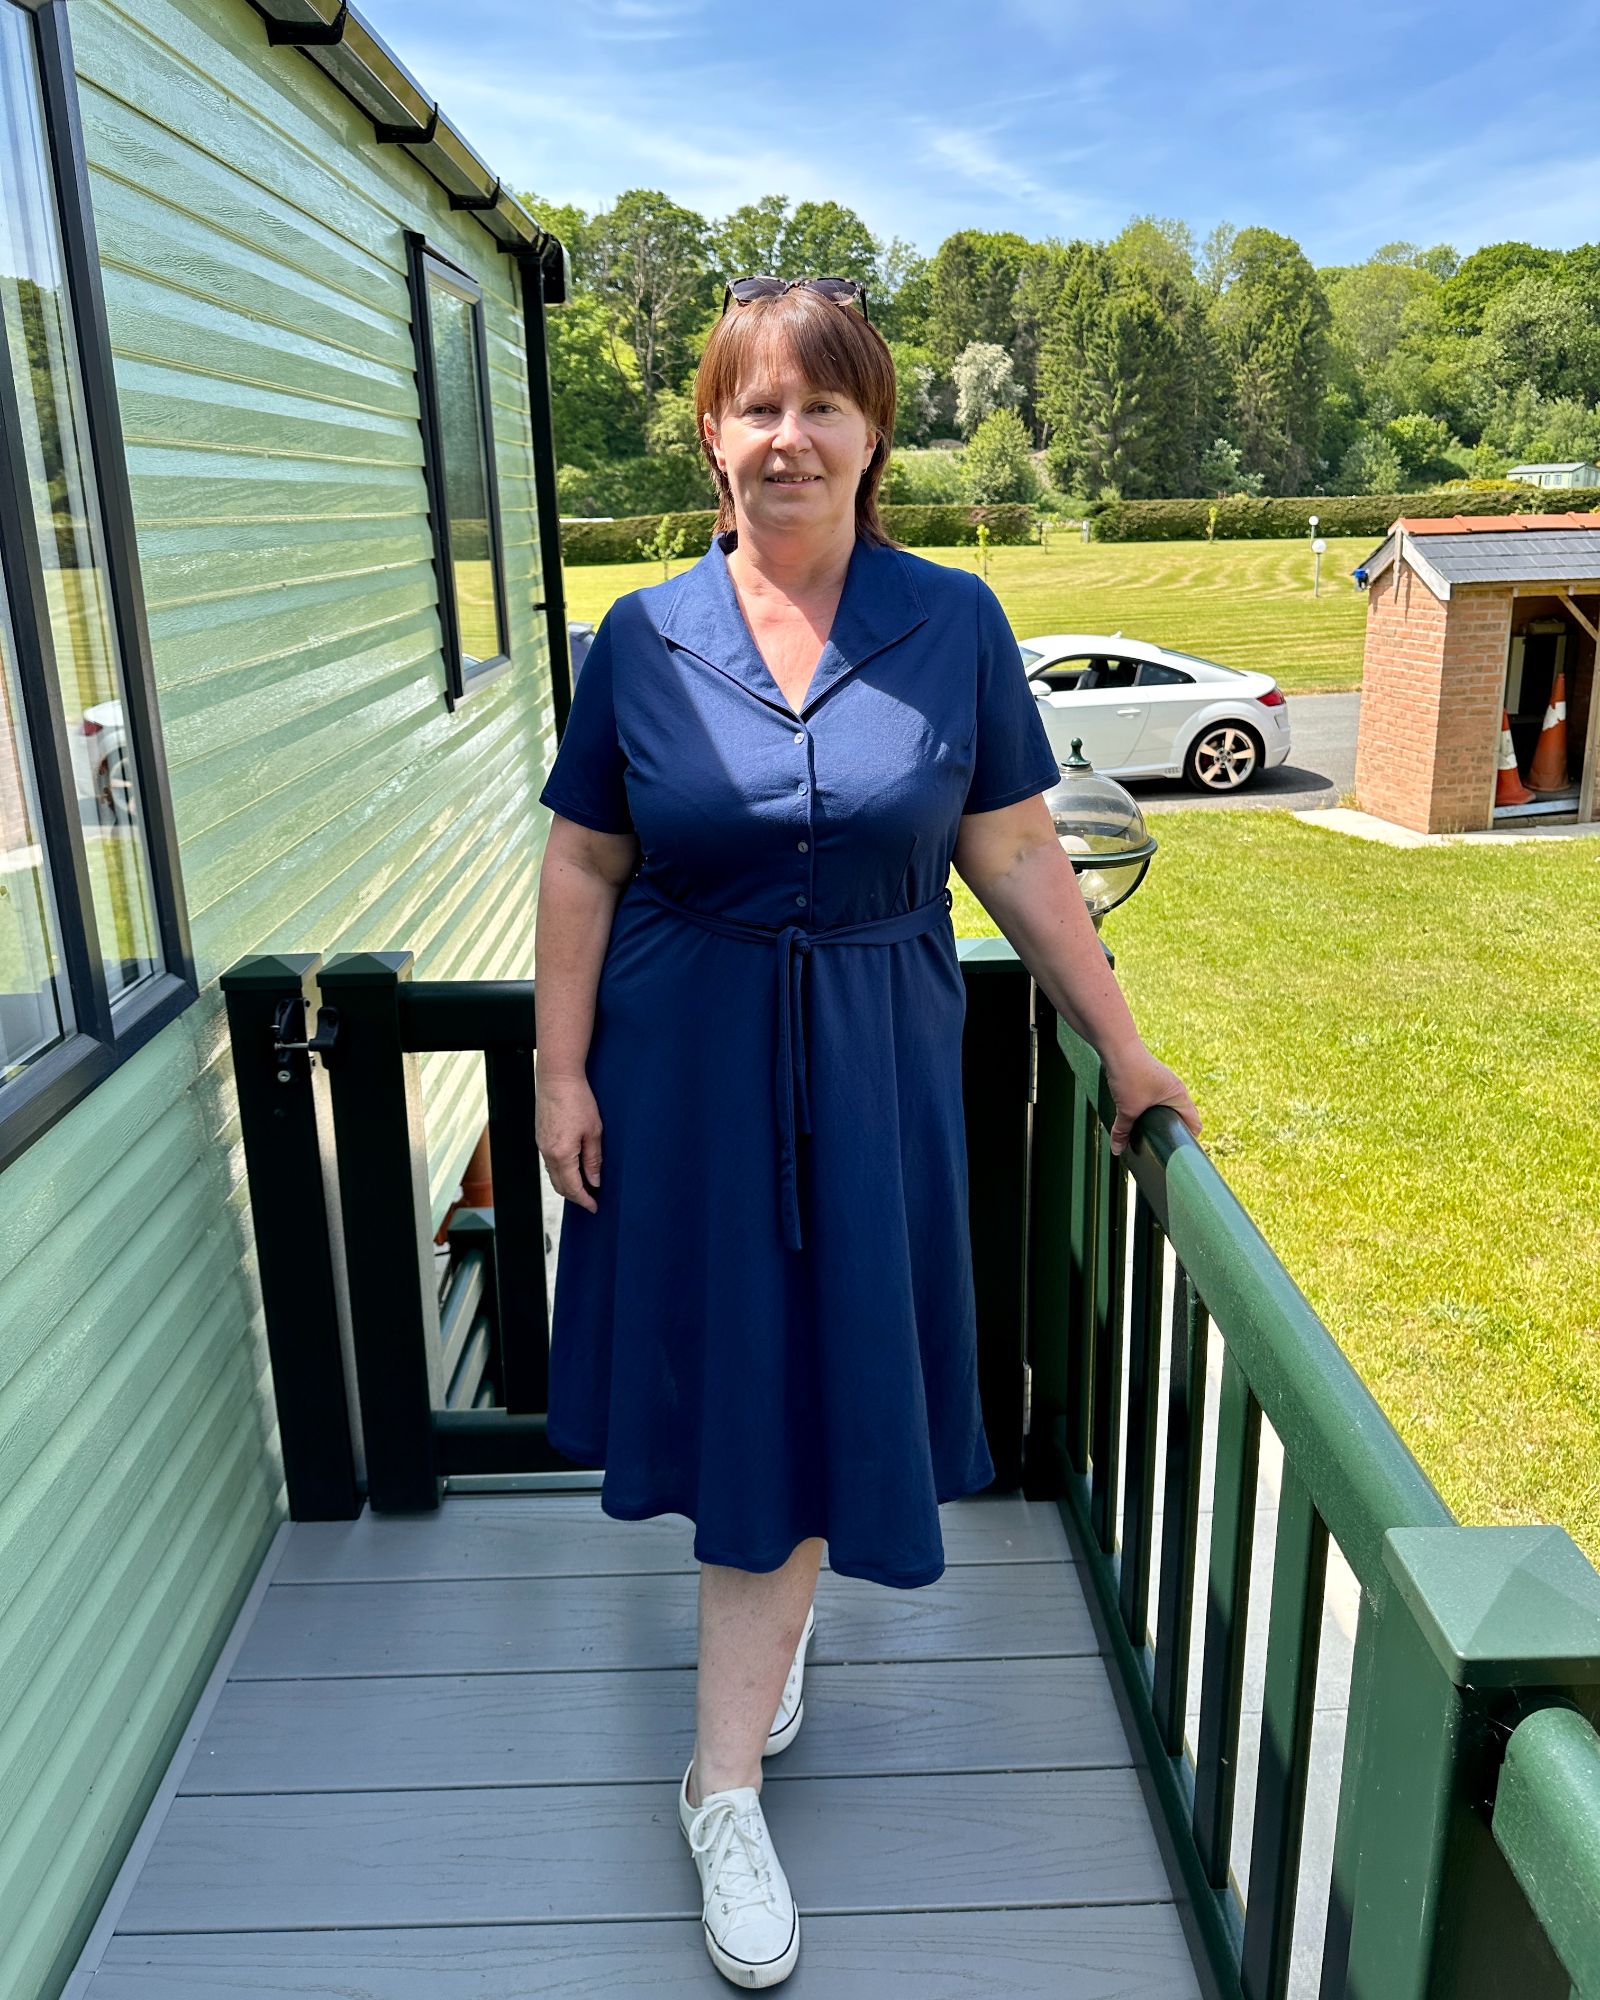 A lady with short brown hair standing on a caravan decking wearing a navy jersey dress. & white pumps.